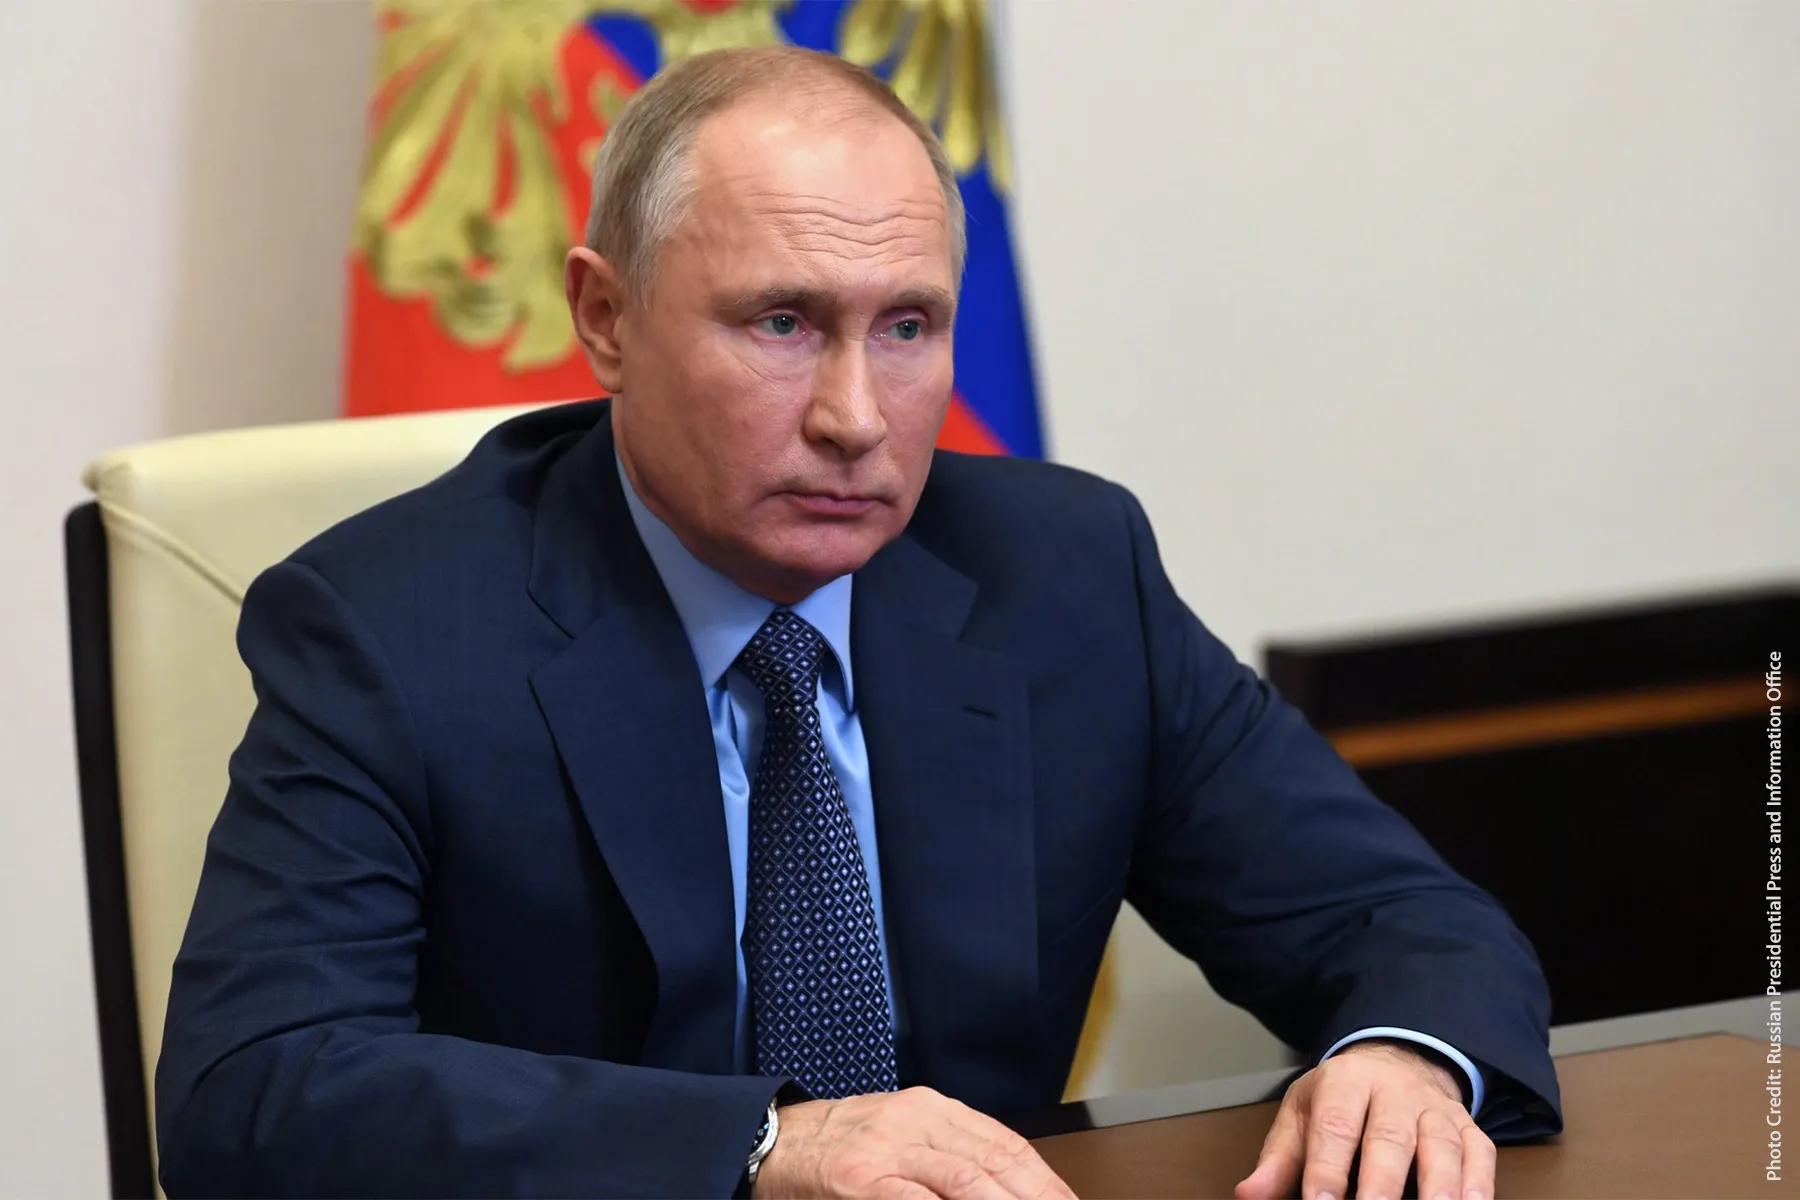 What a Voice Analysis May Tell Us About Putin's State of Mind